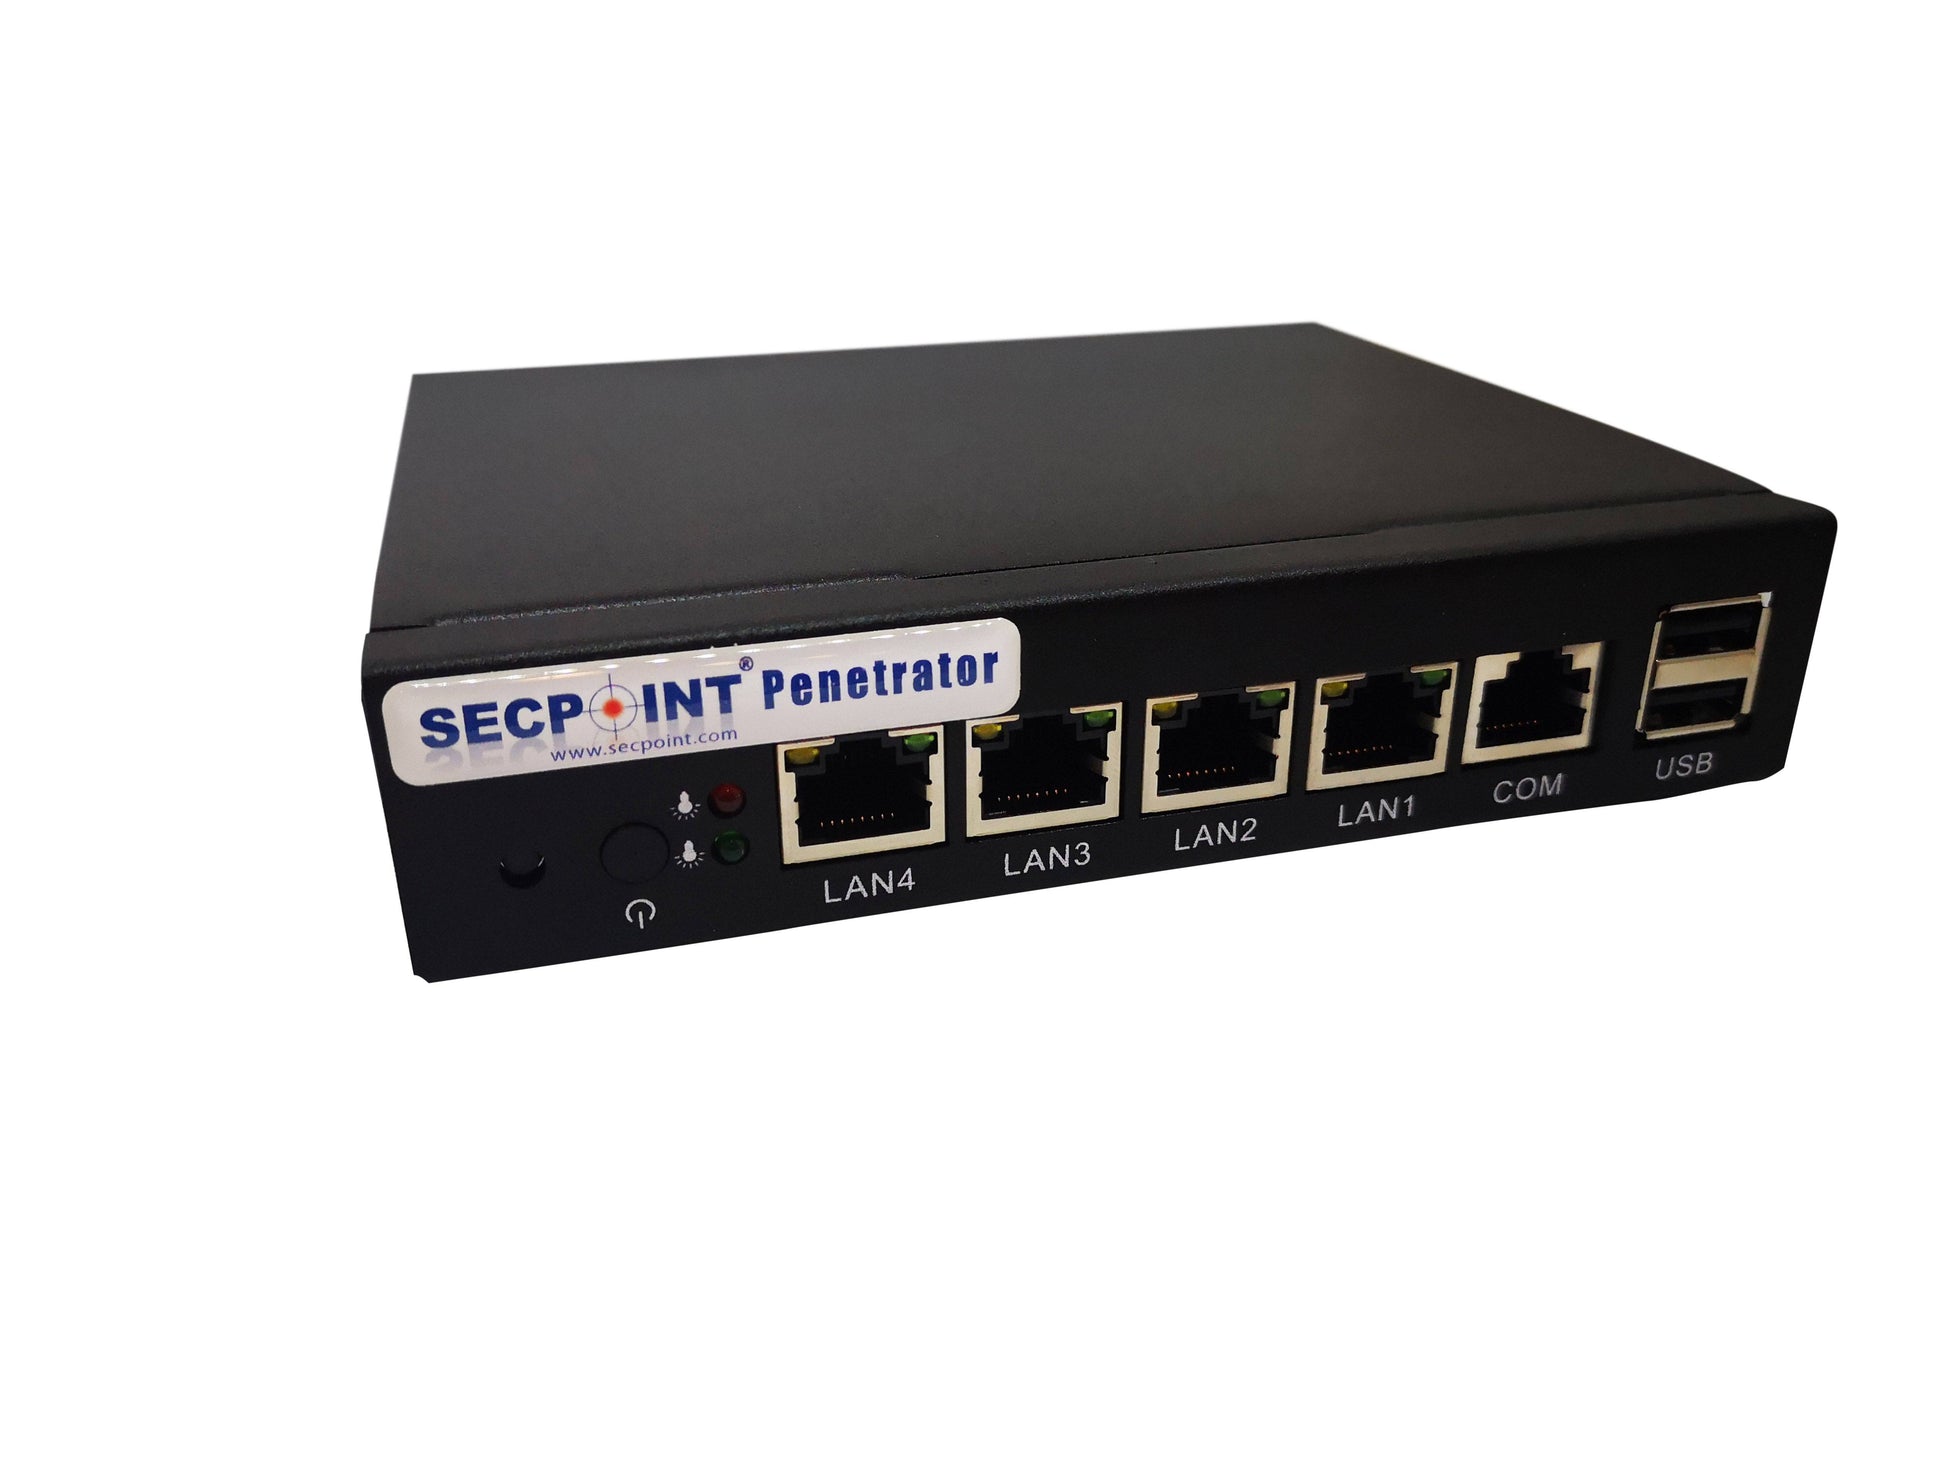 SecPoint Penetrator S9 - 32 IP Concurrent Scan License Vuln Scanning Appliance SFF (1 Year License) - SecPoint